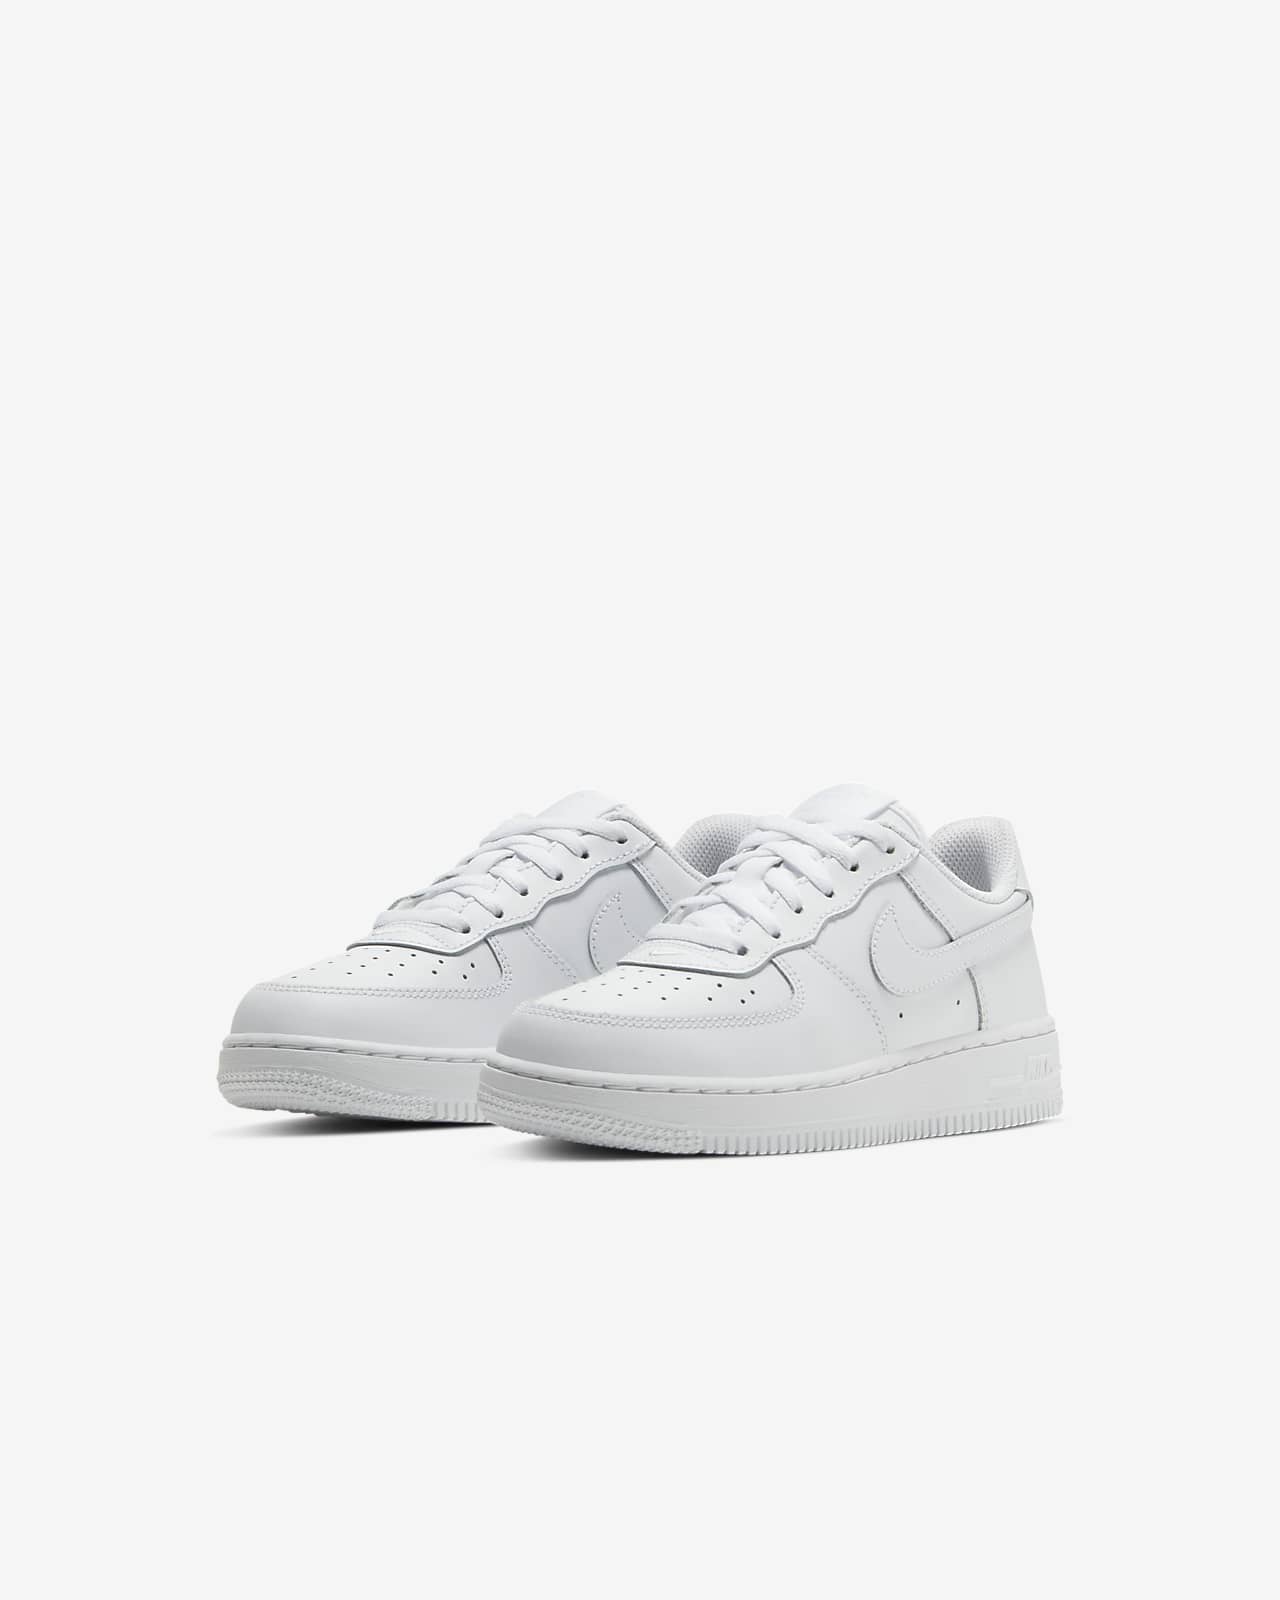 nike air force 1 size 11.5